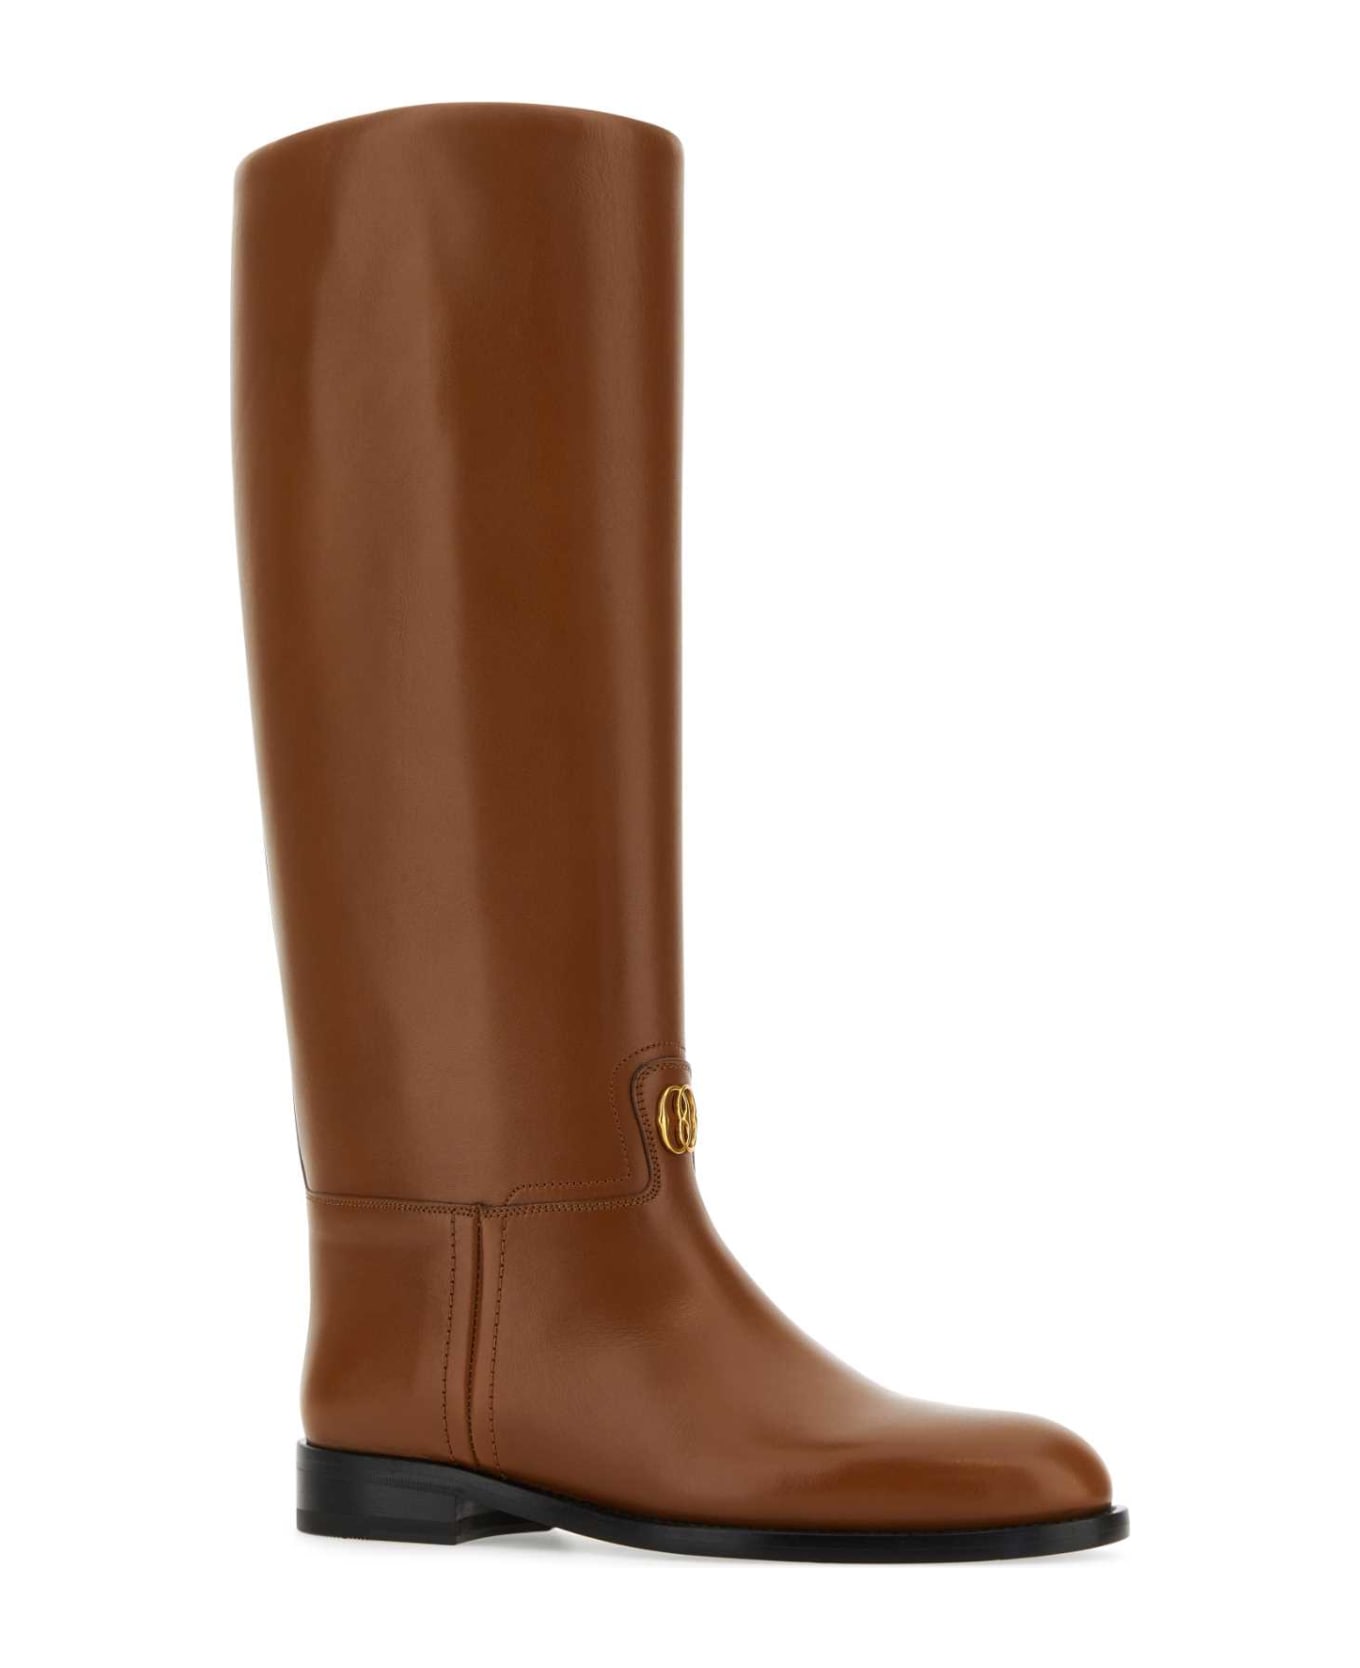 Bally Brown Leather Hollie Boots - CUERO21